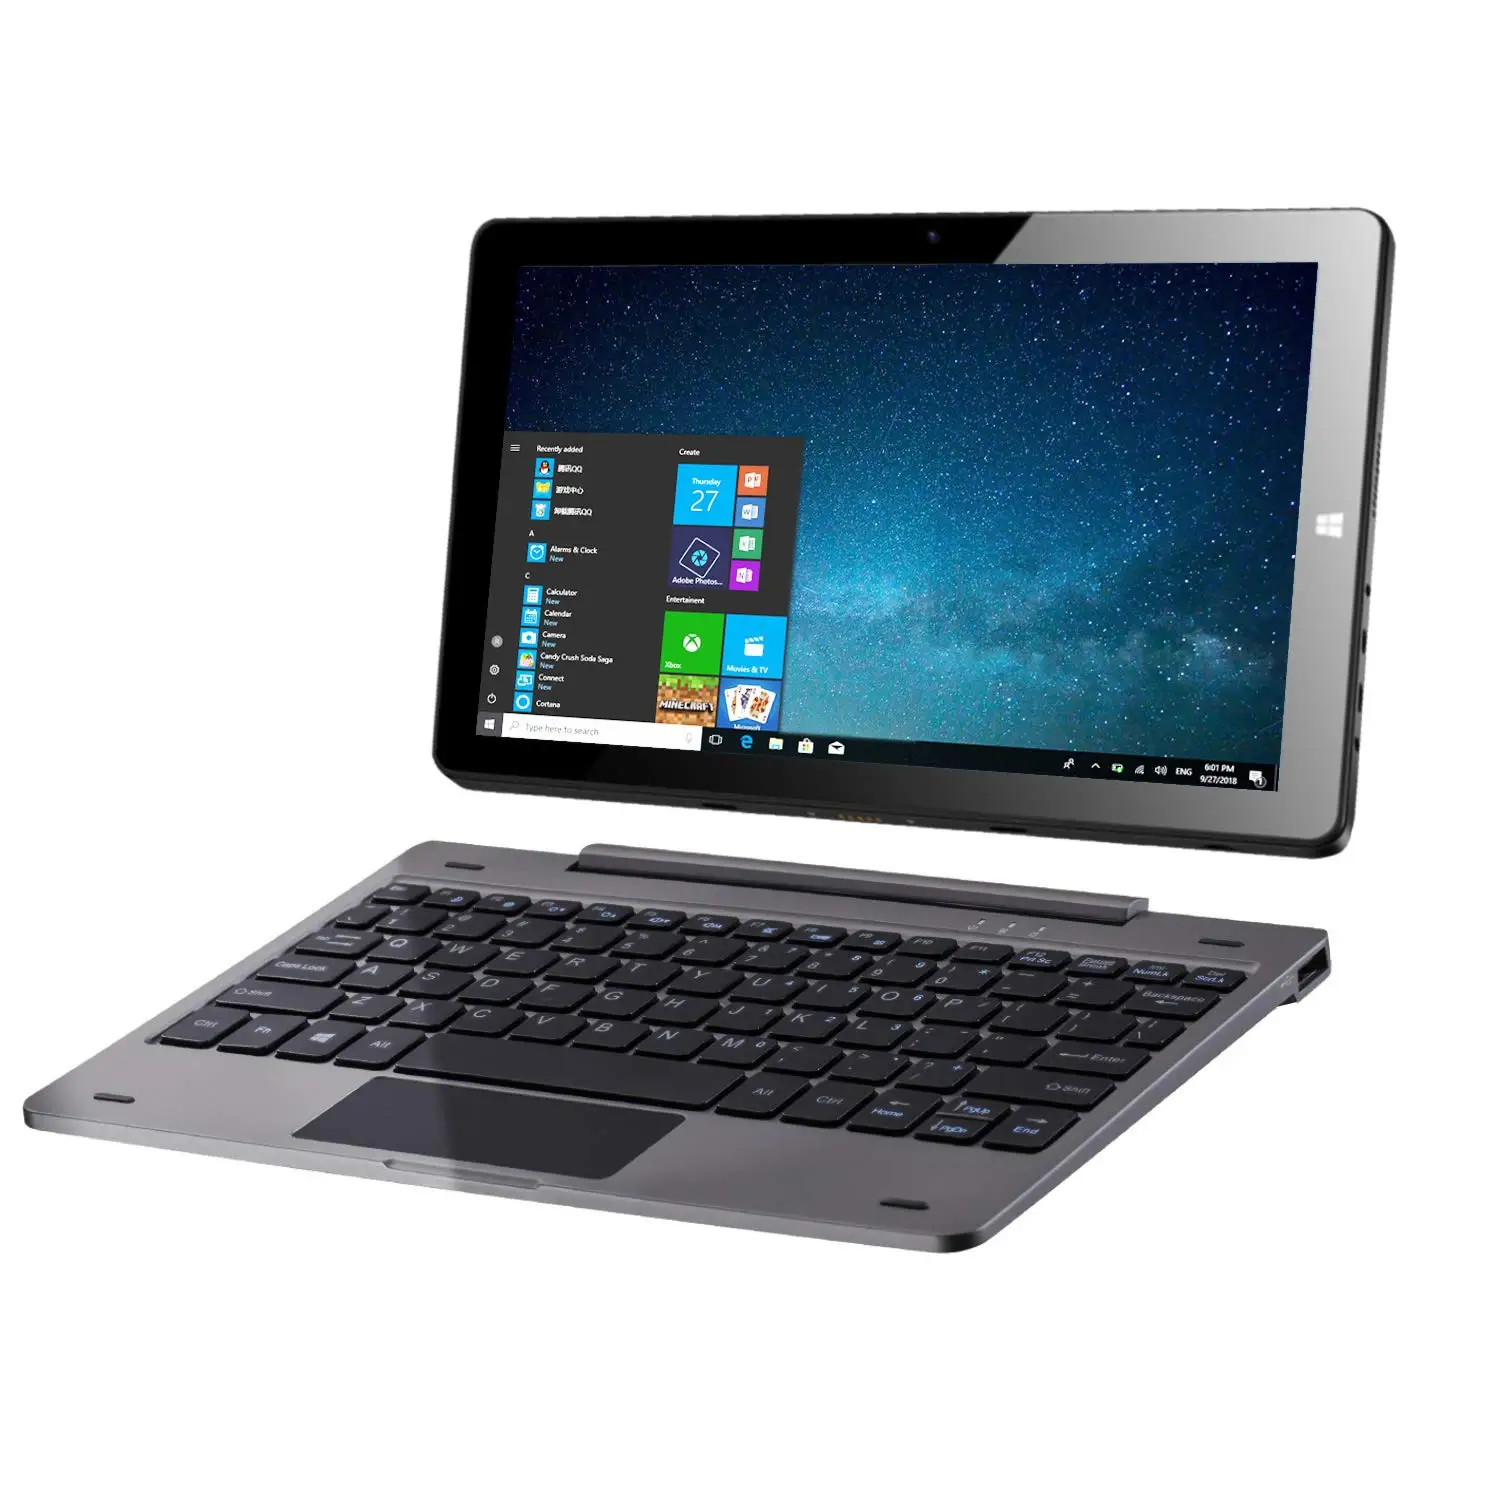 

portable pc Laptop 2 in 1 tablet with keyboard with Intel Processor IPS screen computers laptops and desktops